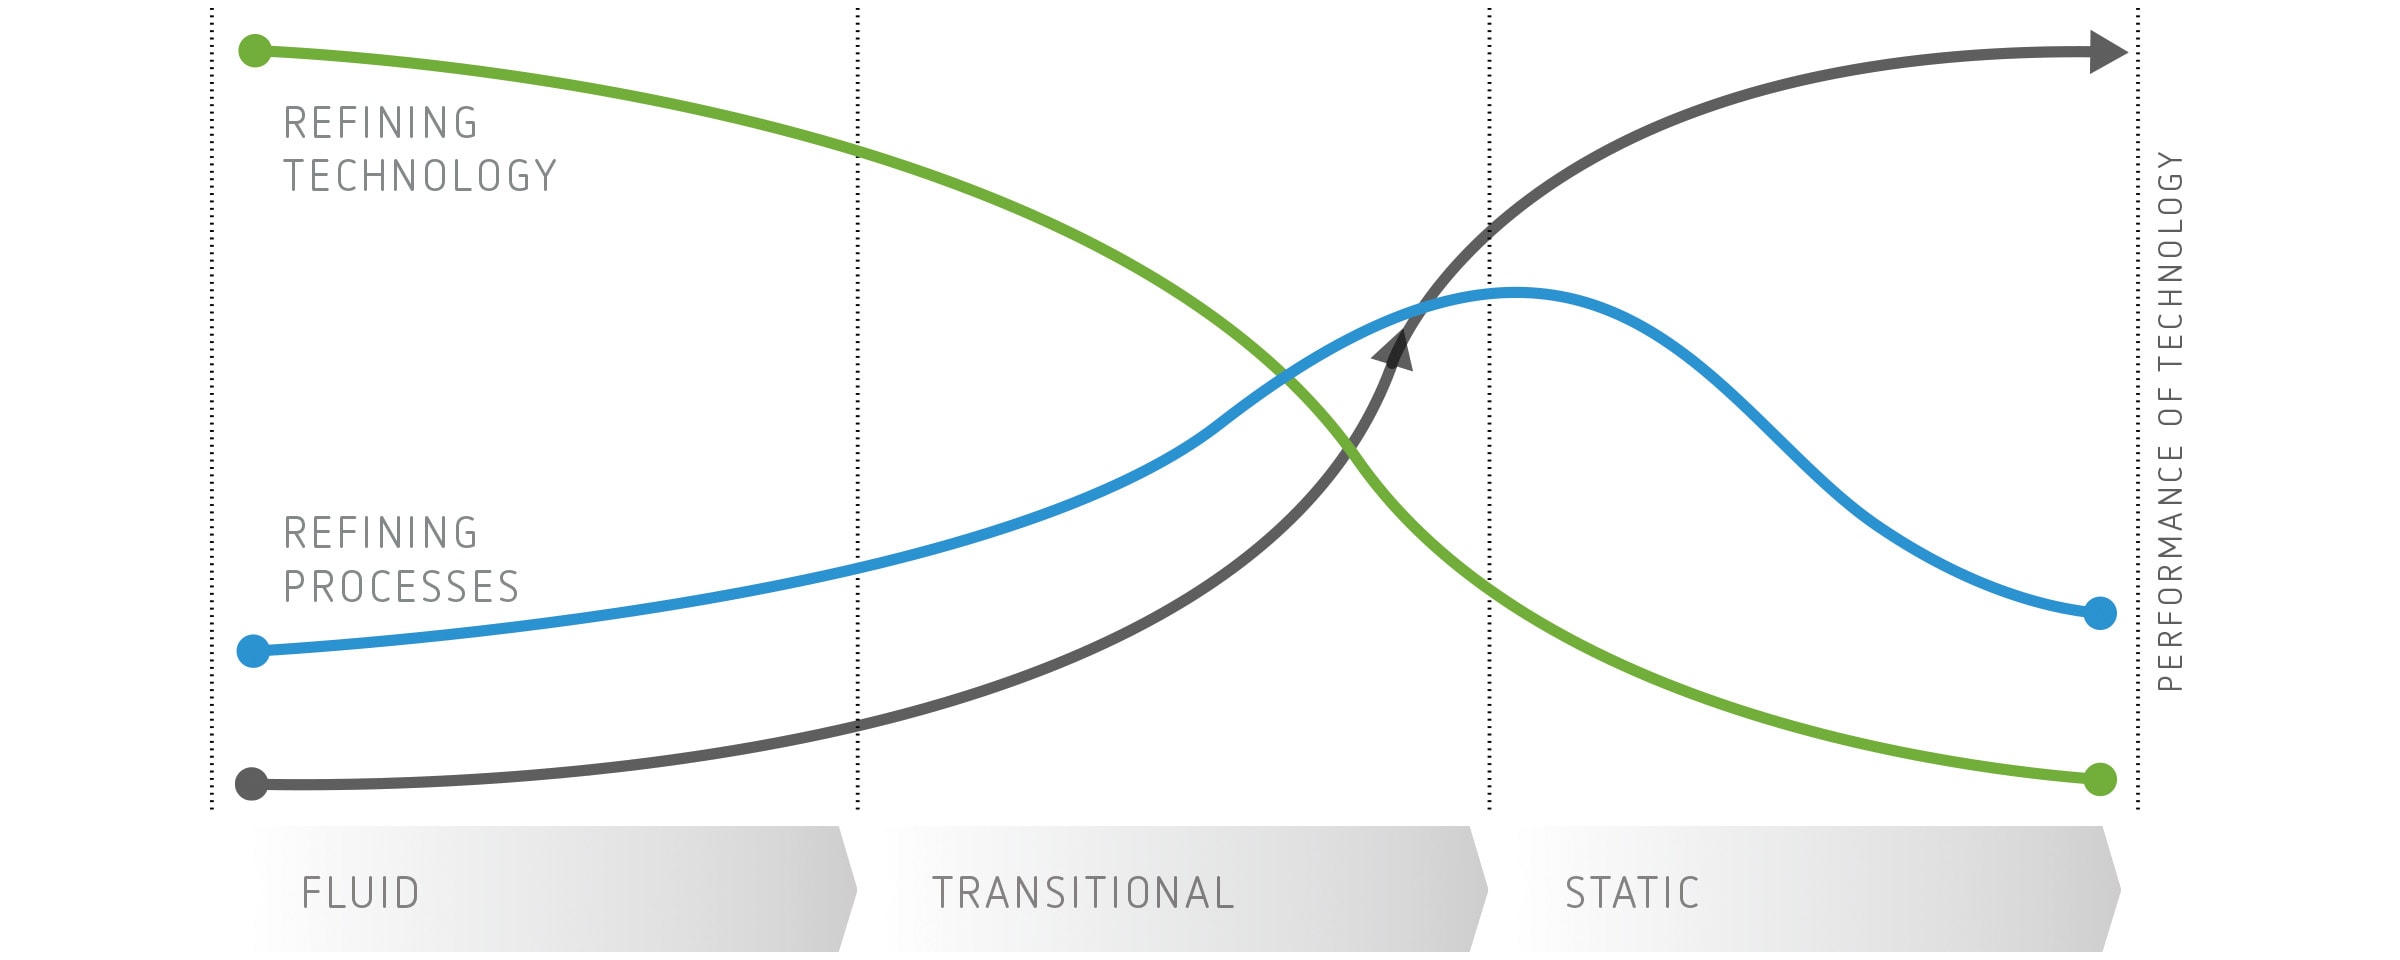 Graphic about the technology s-curve